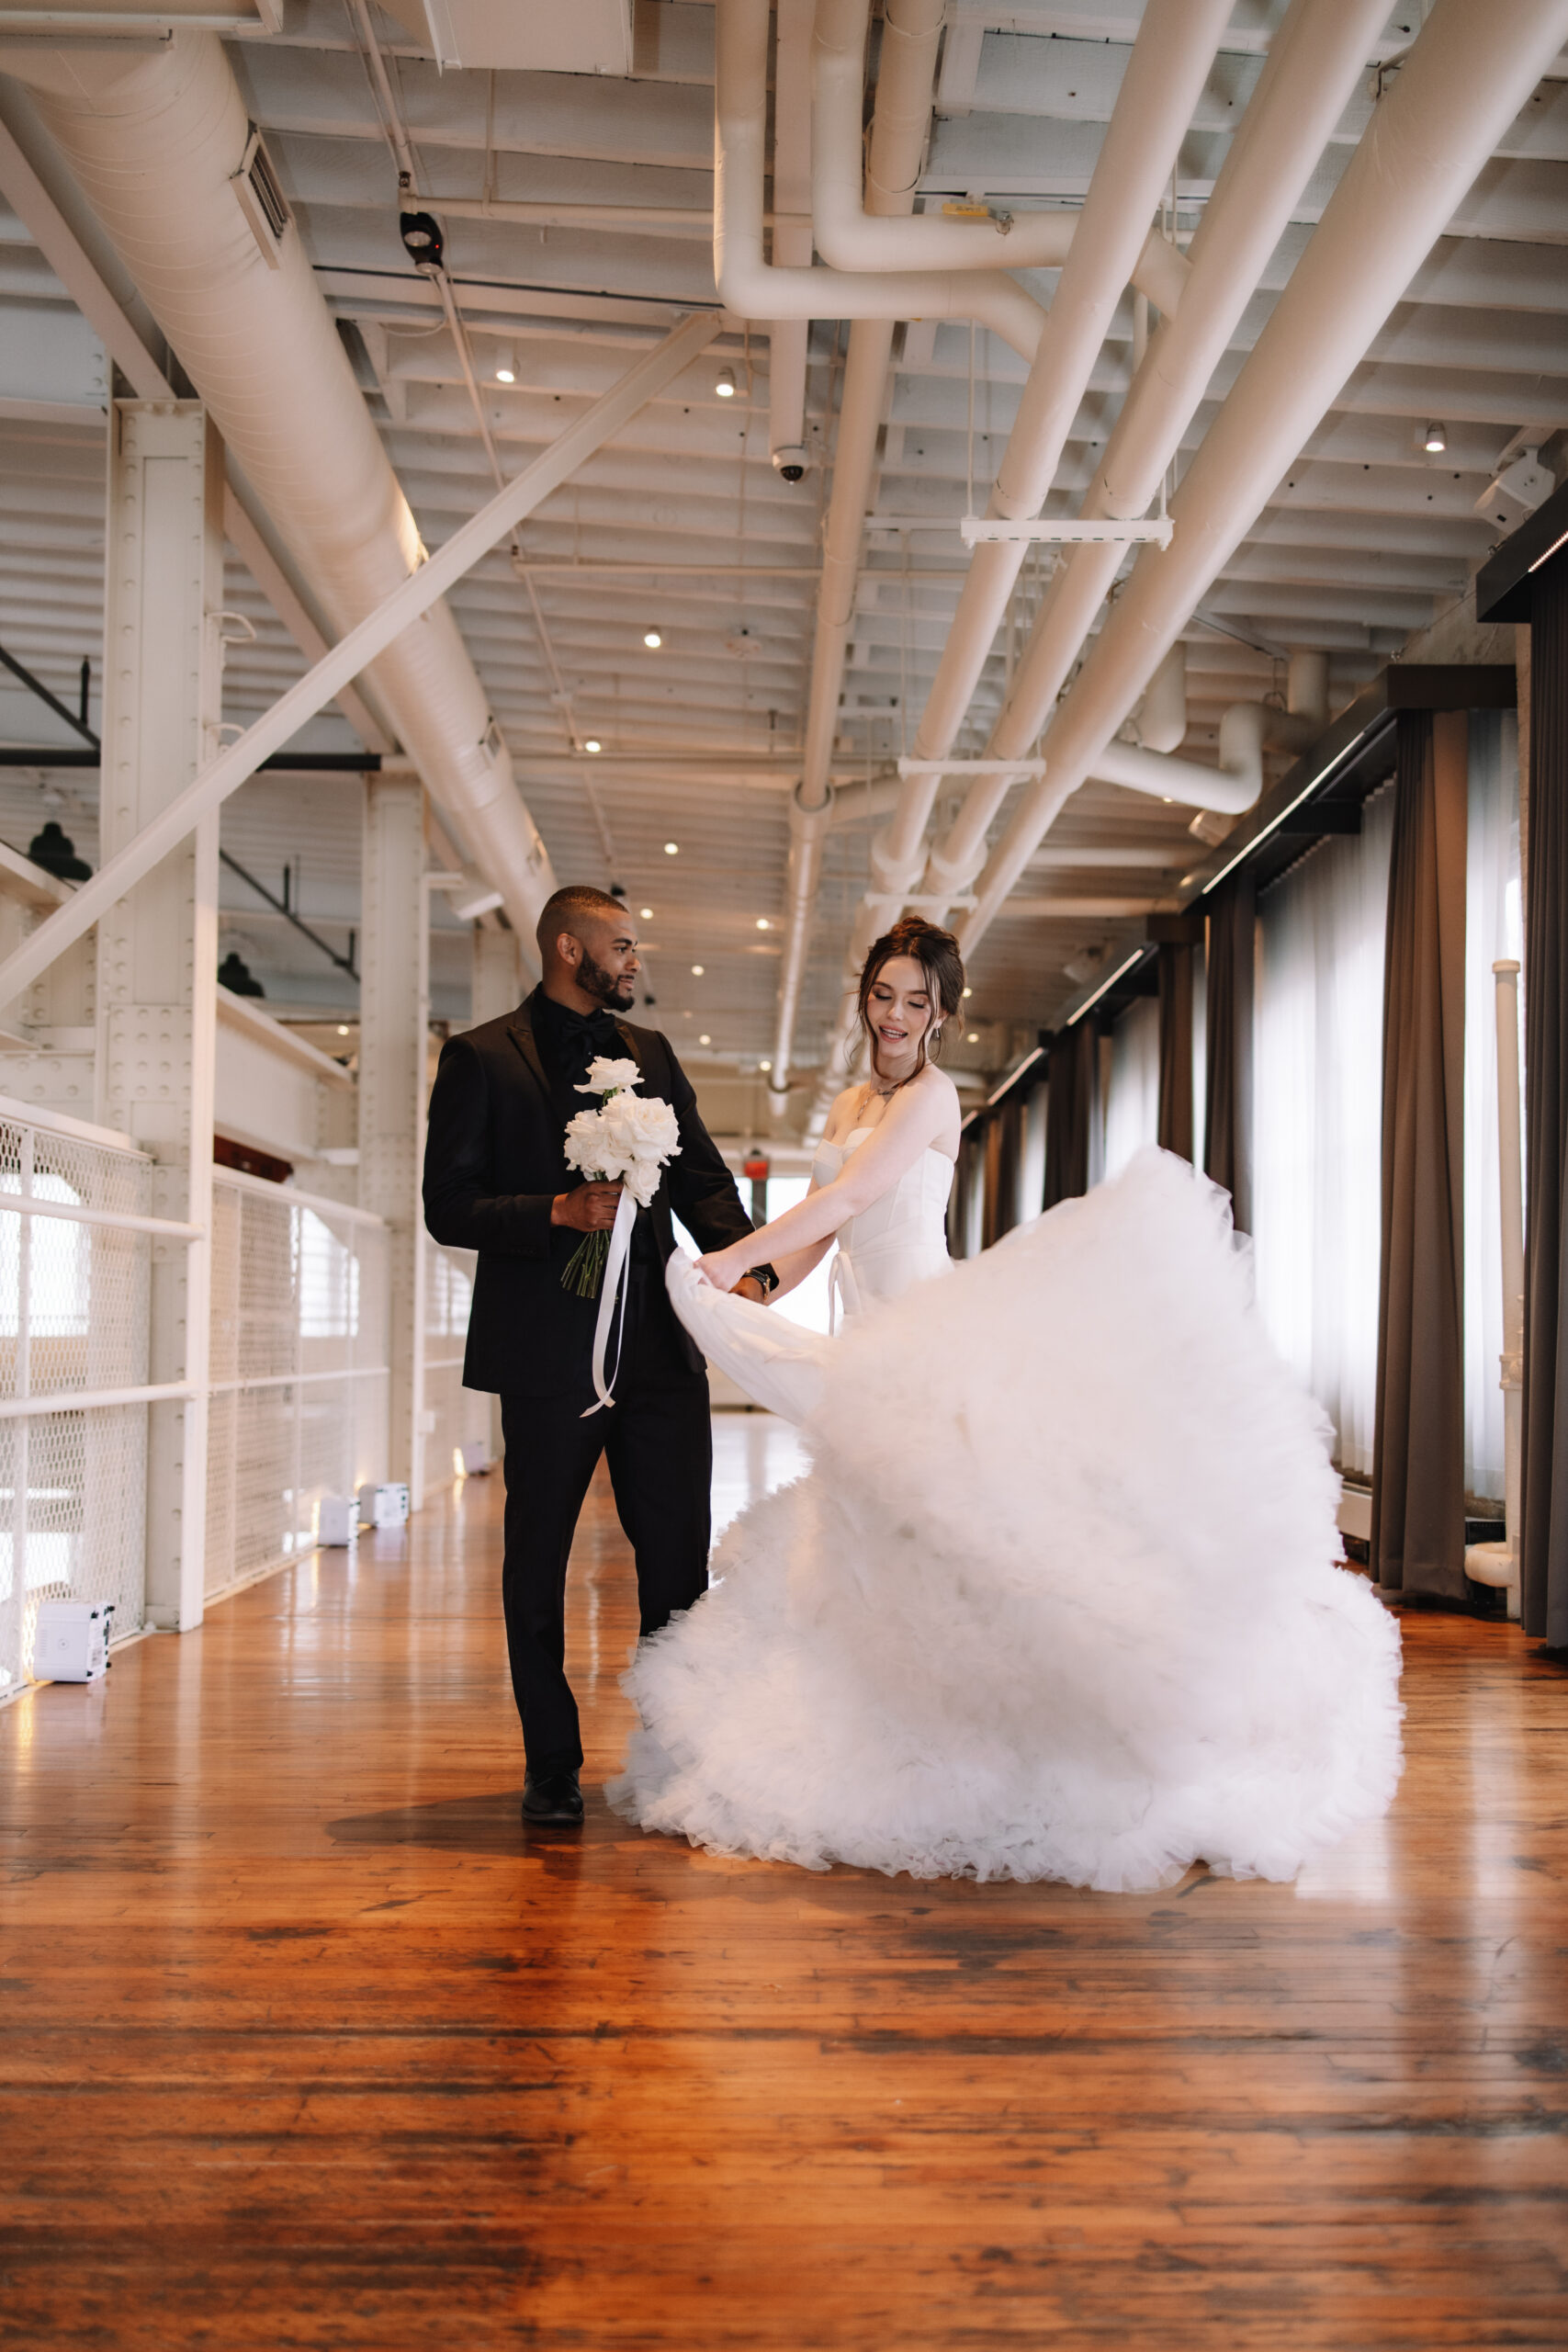 A bride swaying her voluptuous wedding dress, standing next to her husband in an industrial wedding venue called The Machine Shop in Minneapolis